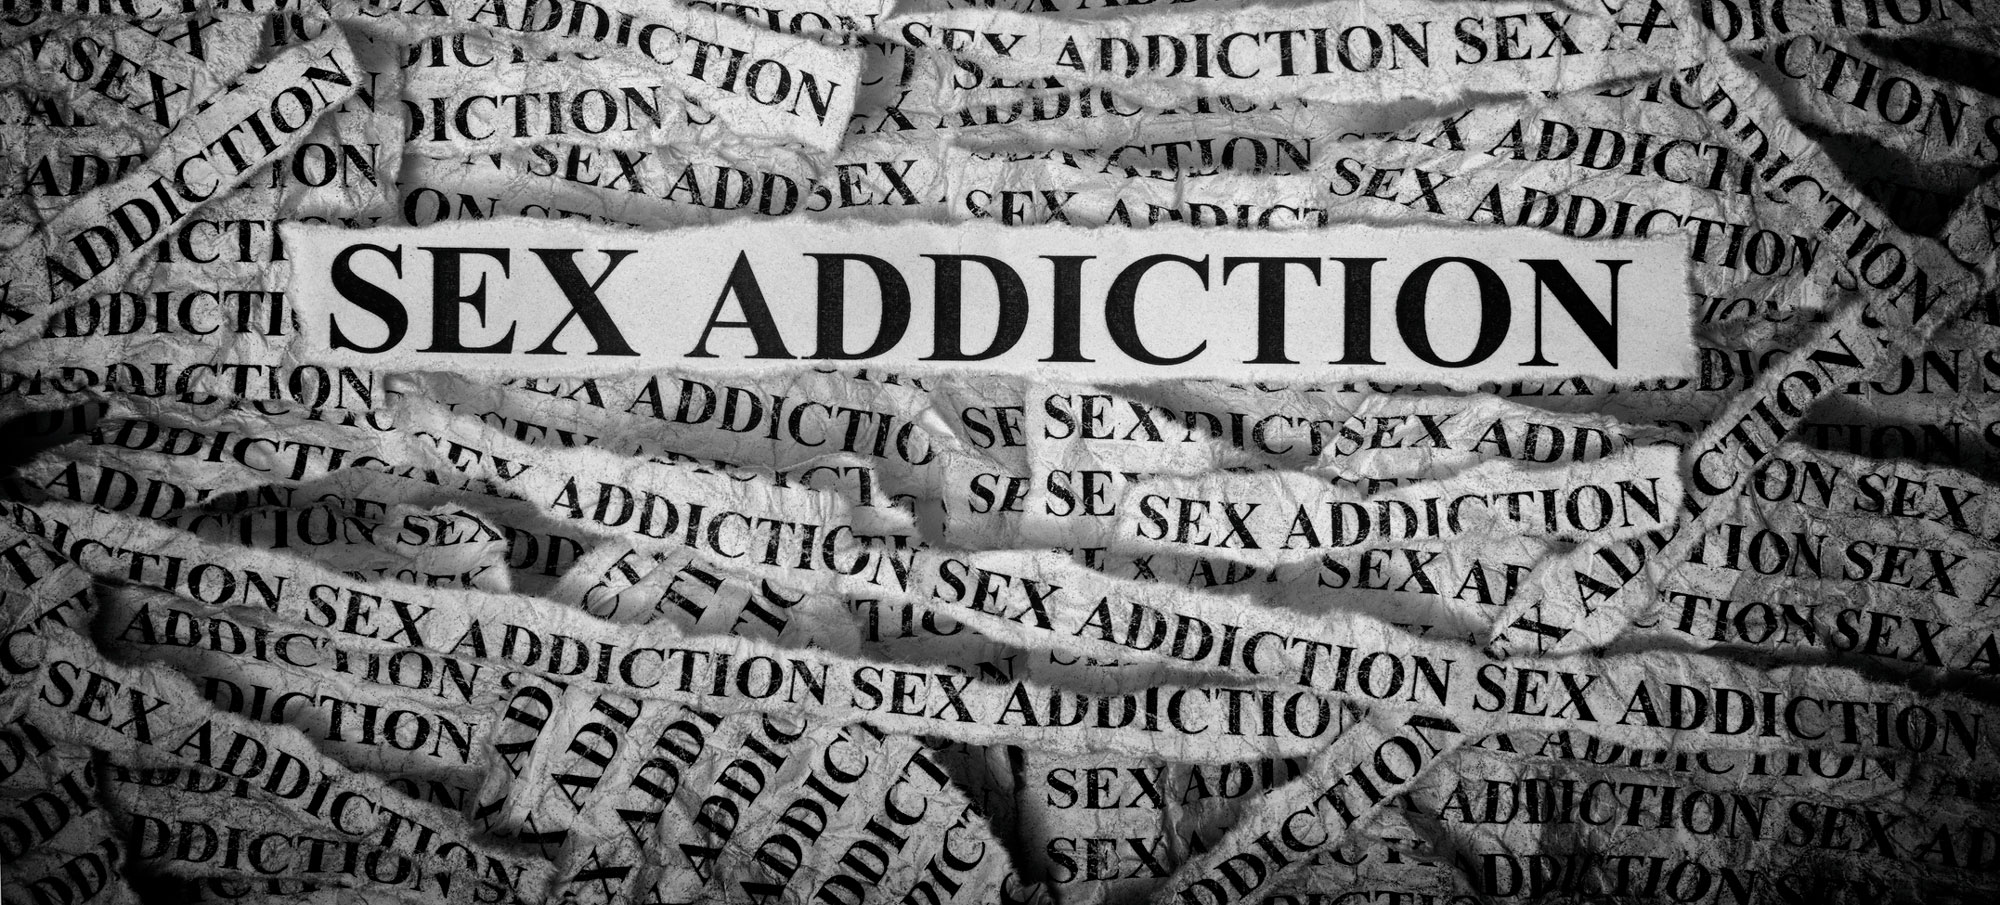 Signs That You Need Help for Sex Addiction The Meadows